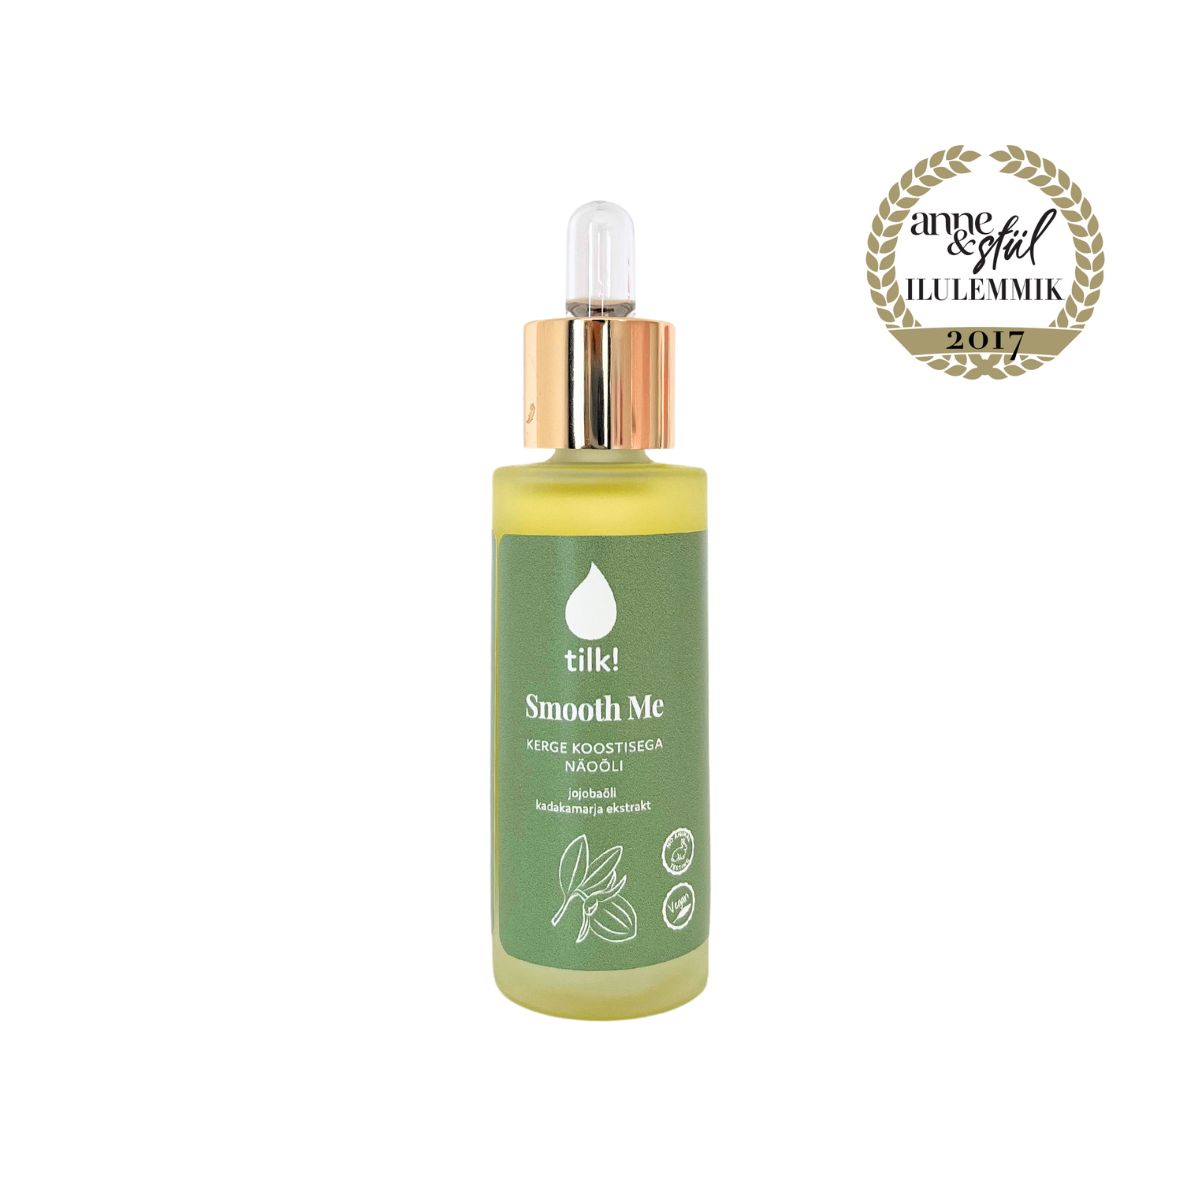 The best face oil